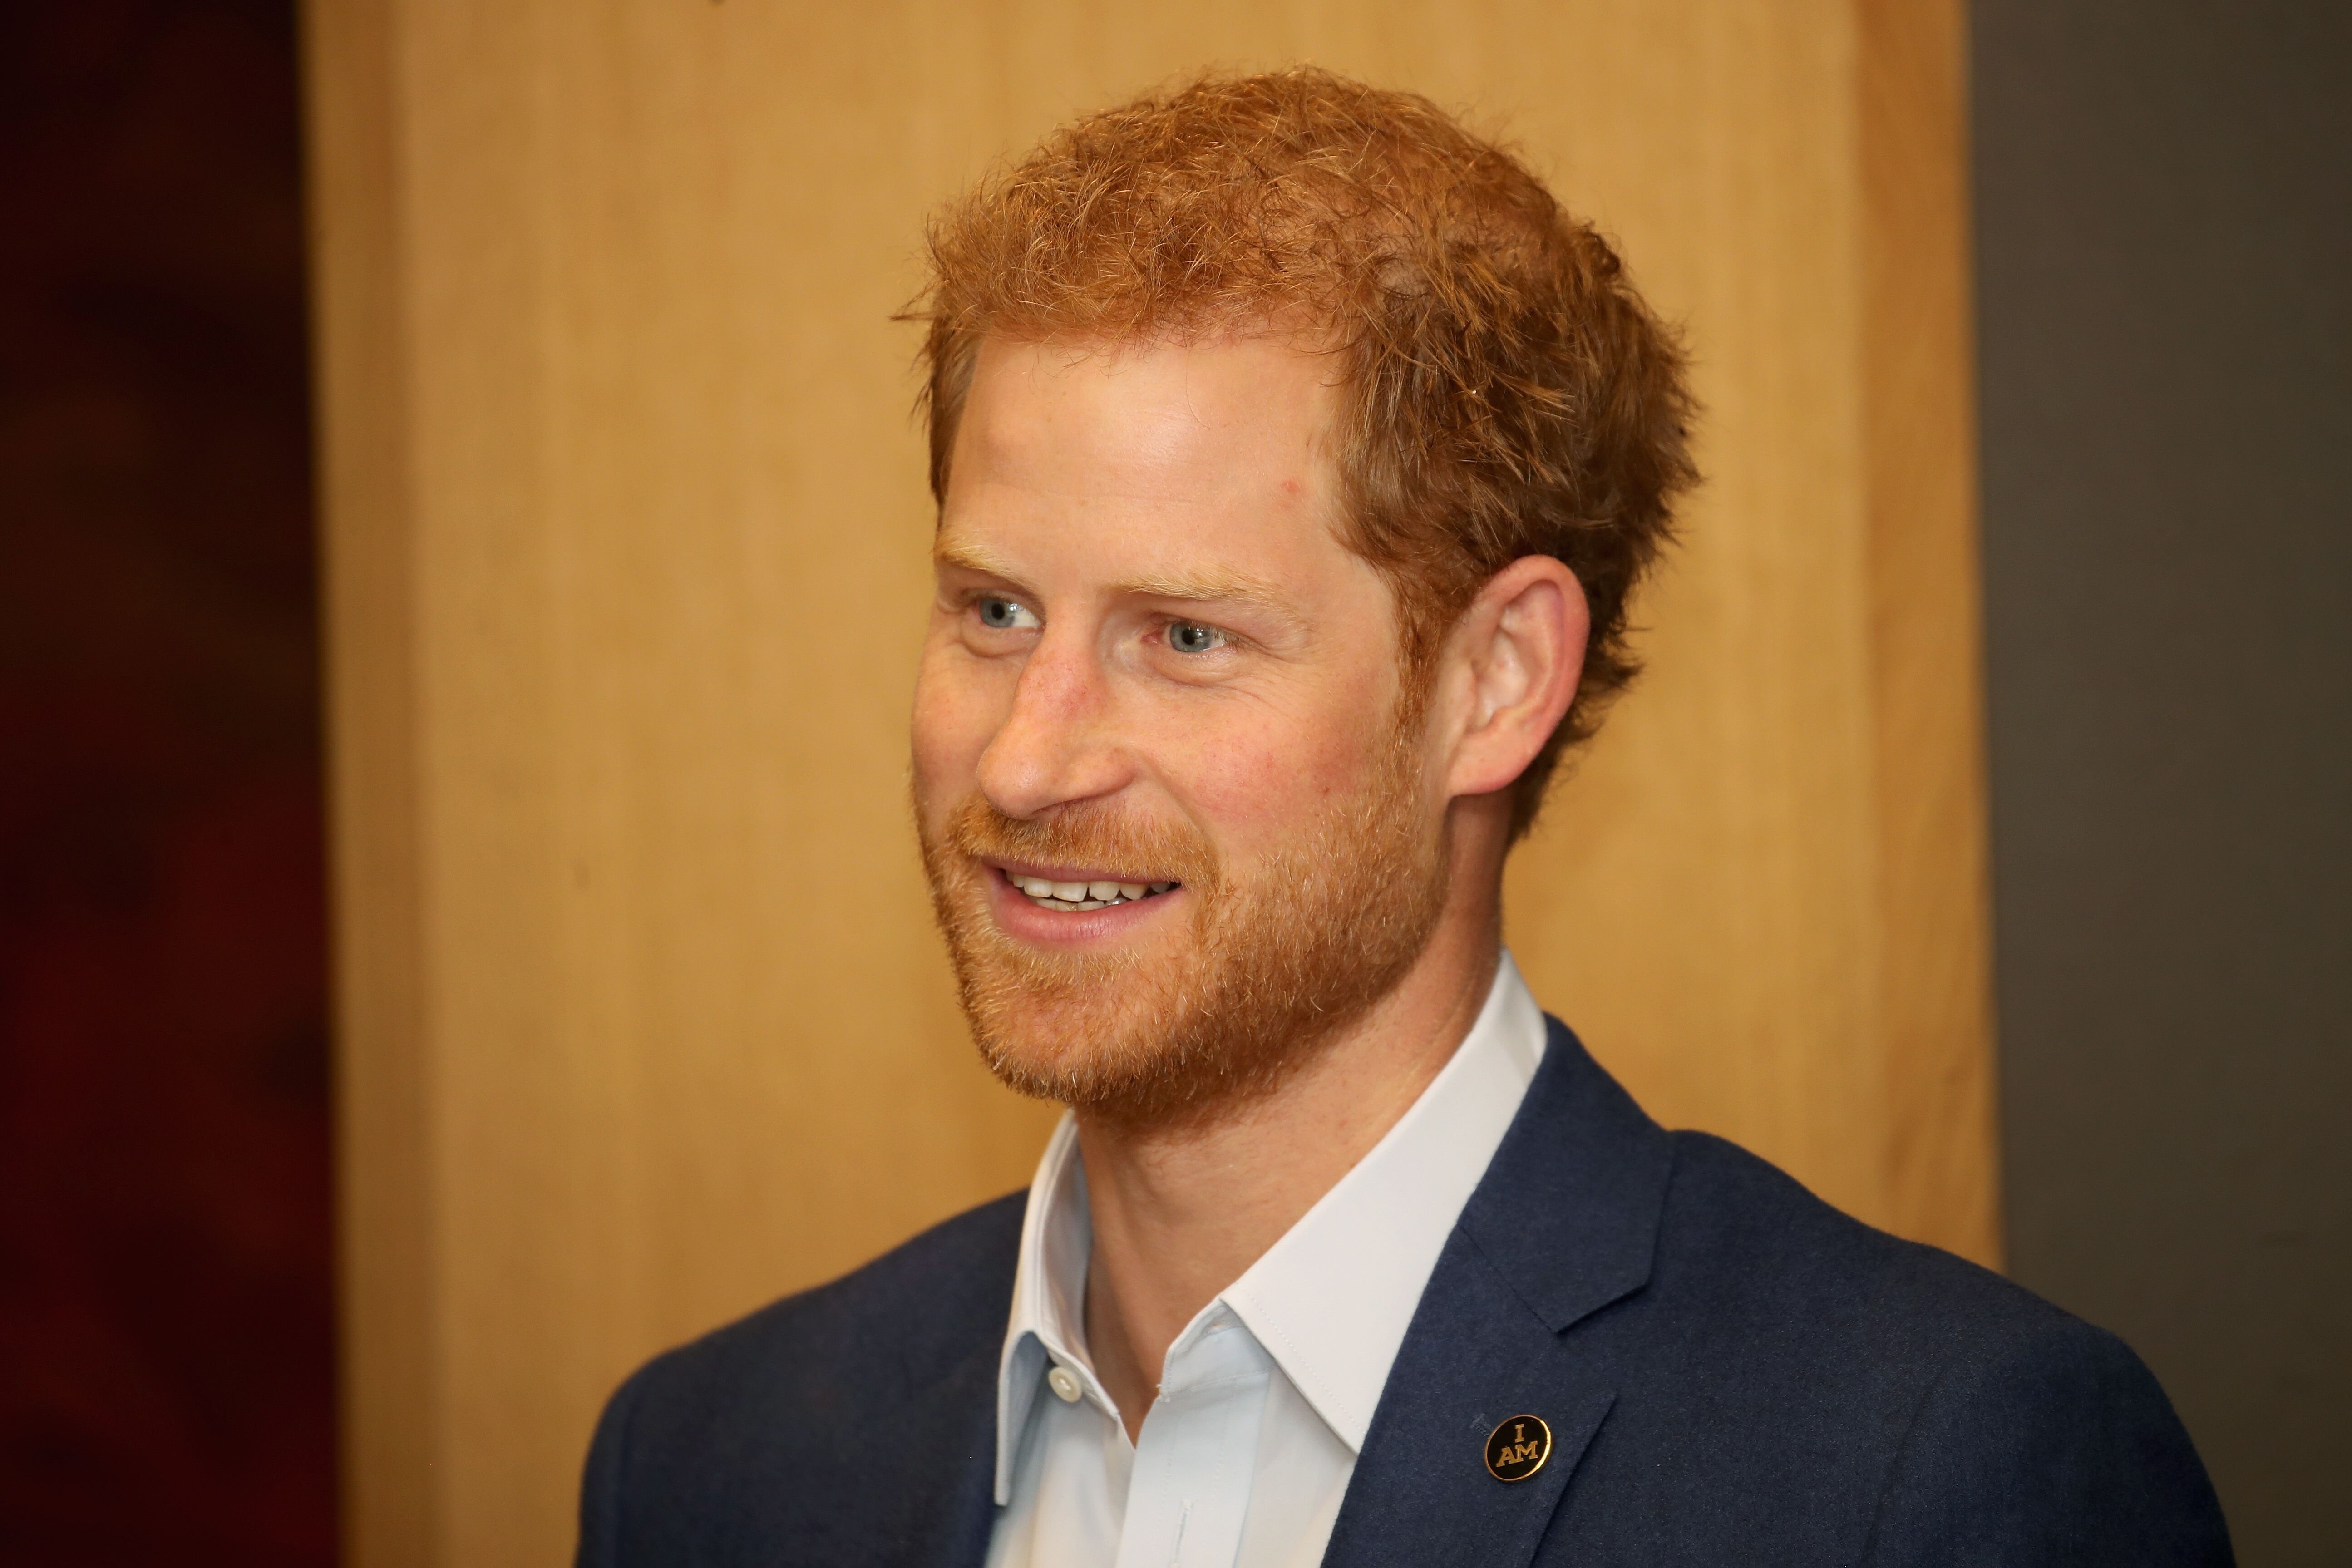 Prince Harry attends the True Patriot Love Symposium at Scotia Plaza during a pre Invictus Games event in Toronto, Canada | Photo: Getty Images